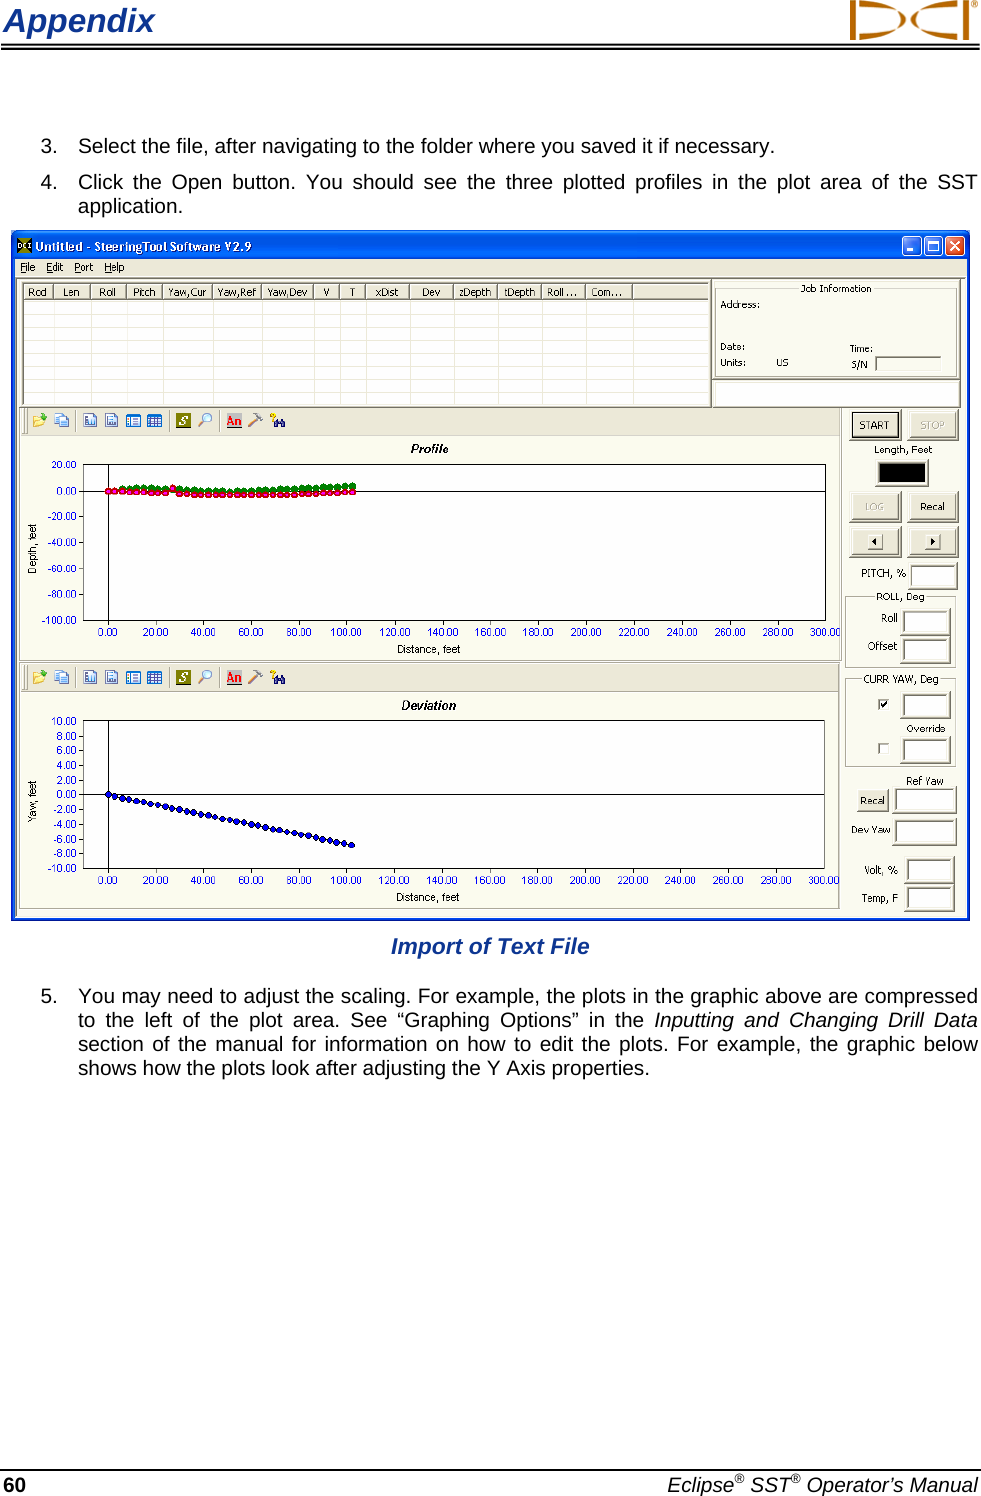 Appendix  3.  Select the file, after navigating to the folder where you saved it if necessary. 4.  Click the Open button. You should see the three plotted profiles in the plot area of the SST application.  Import of Text File  5.  You may need to adjust the scaling. For example, the plots in the graphic above are compressed to the left of the plot area. See “Graphing Options” in the Inputting and Changing Drill Data section of the manual for information on how to edit the plots. For example, the graphic below shows how the plots look after adjusting the Y Axis properties.  60  Eclipse® SST® Operator’s Manual 